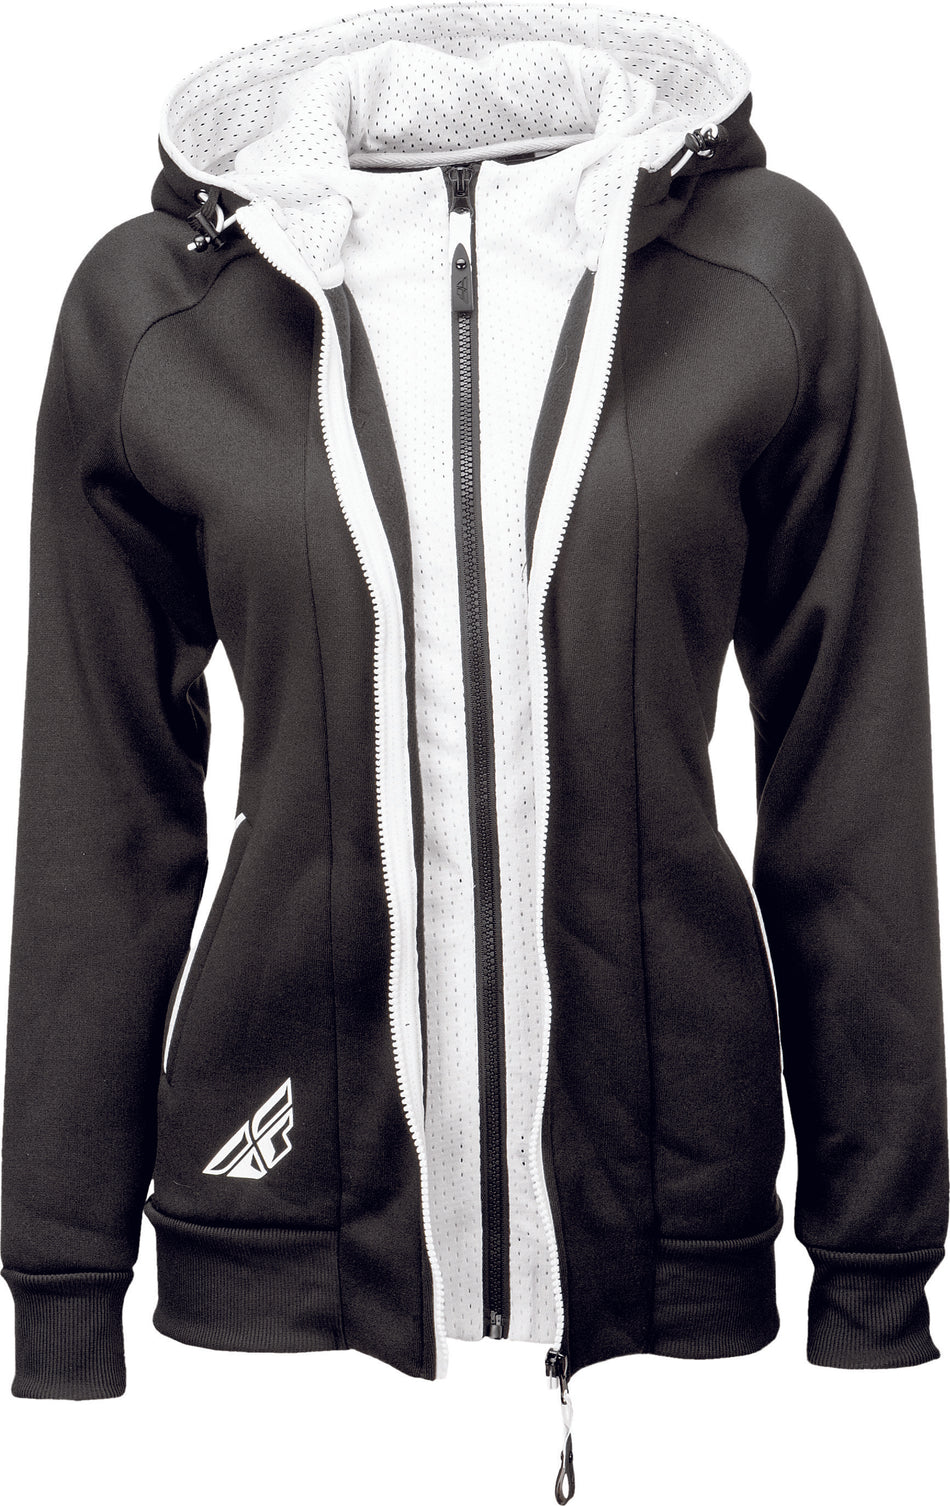 FLY RACING Fly Track Zip Up Hoodie Black/White Xl 358-0100X